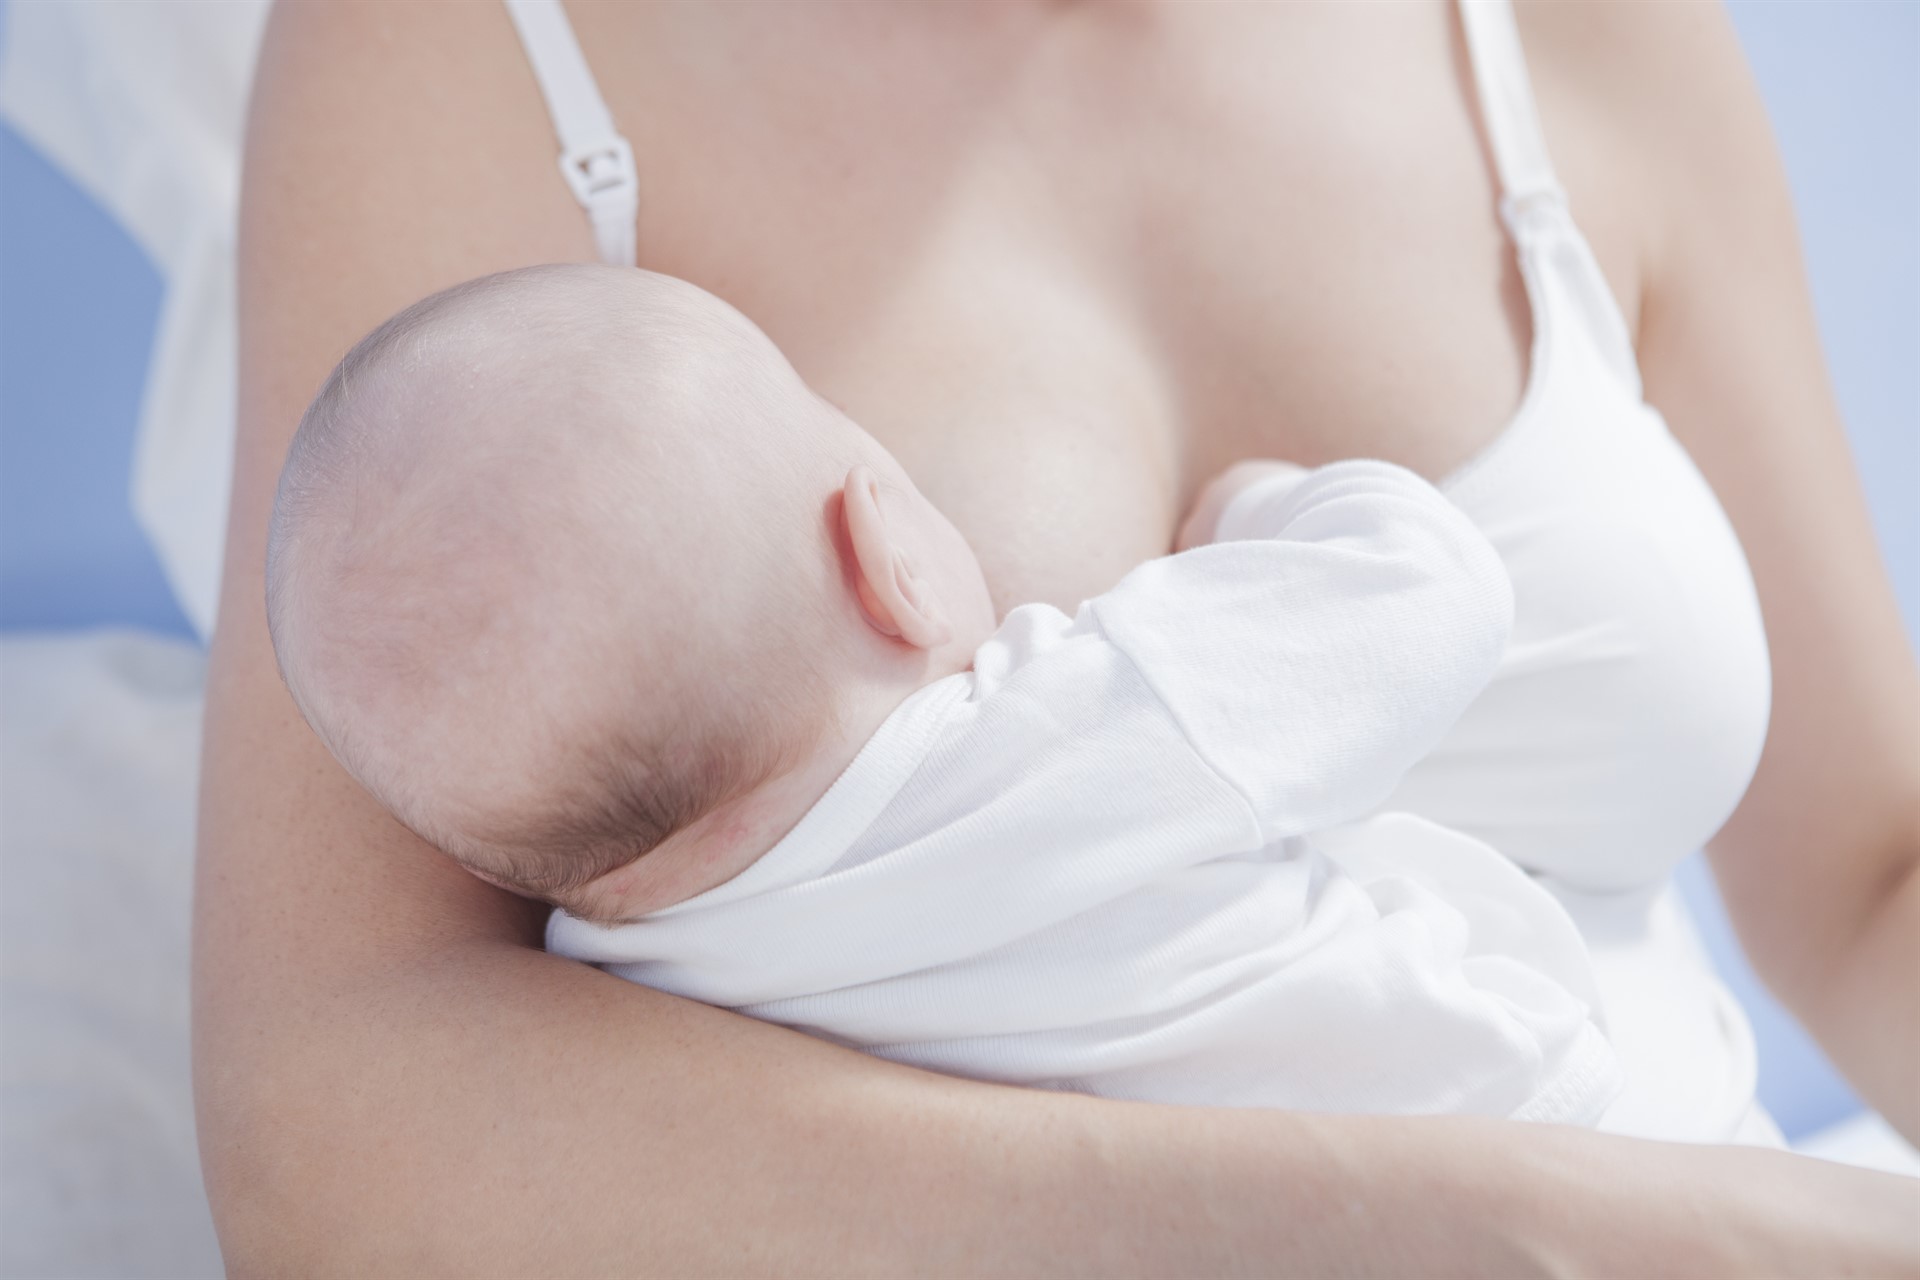 Tips for successful breast feeding